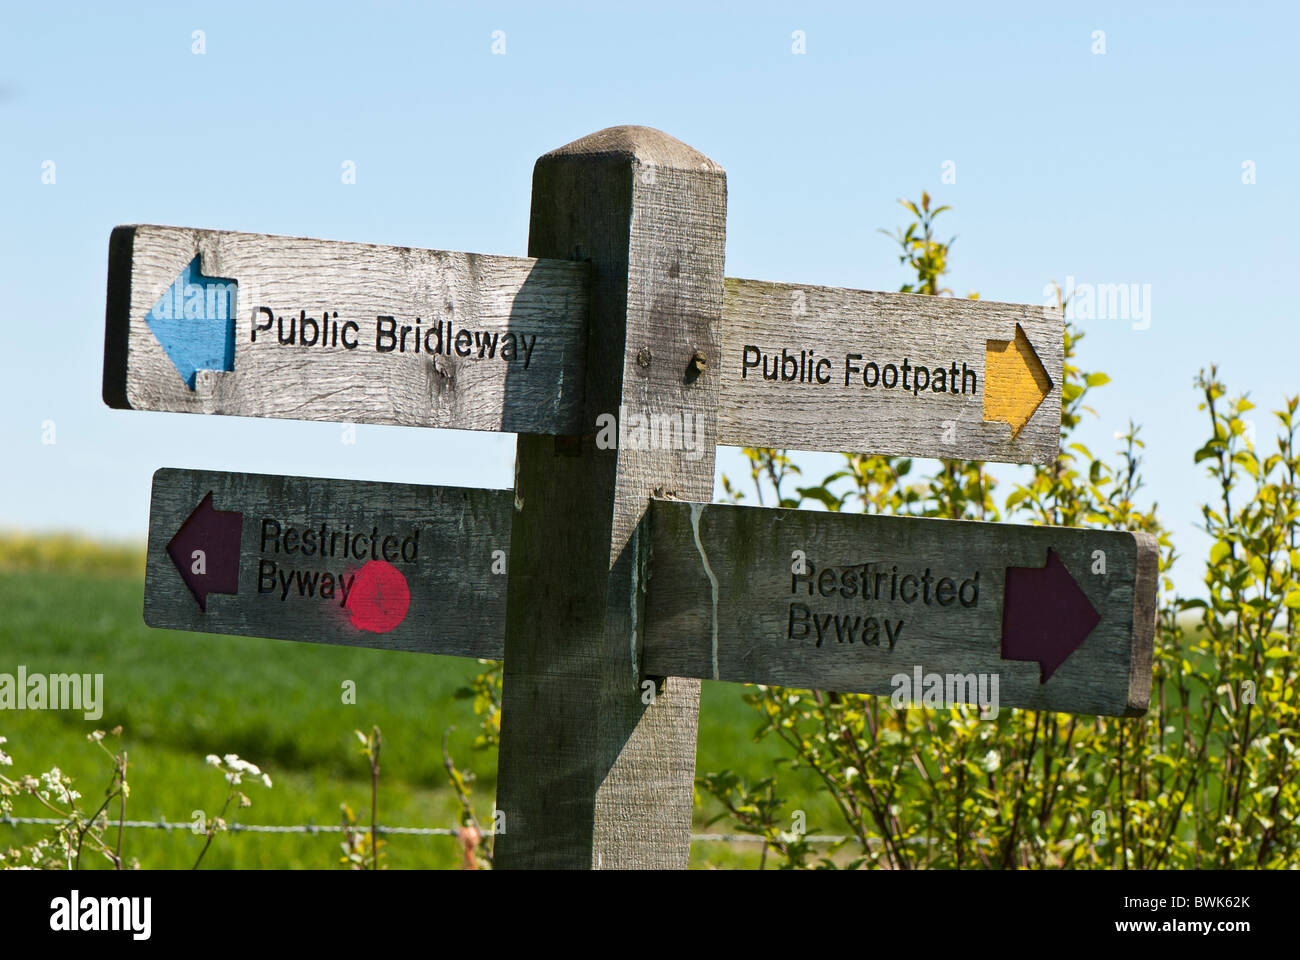 Wooden sign post public bridleway, Public Footpath Restricted Byway Burpham Sussex Stock Photo